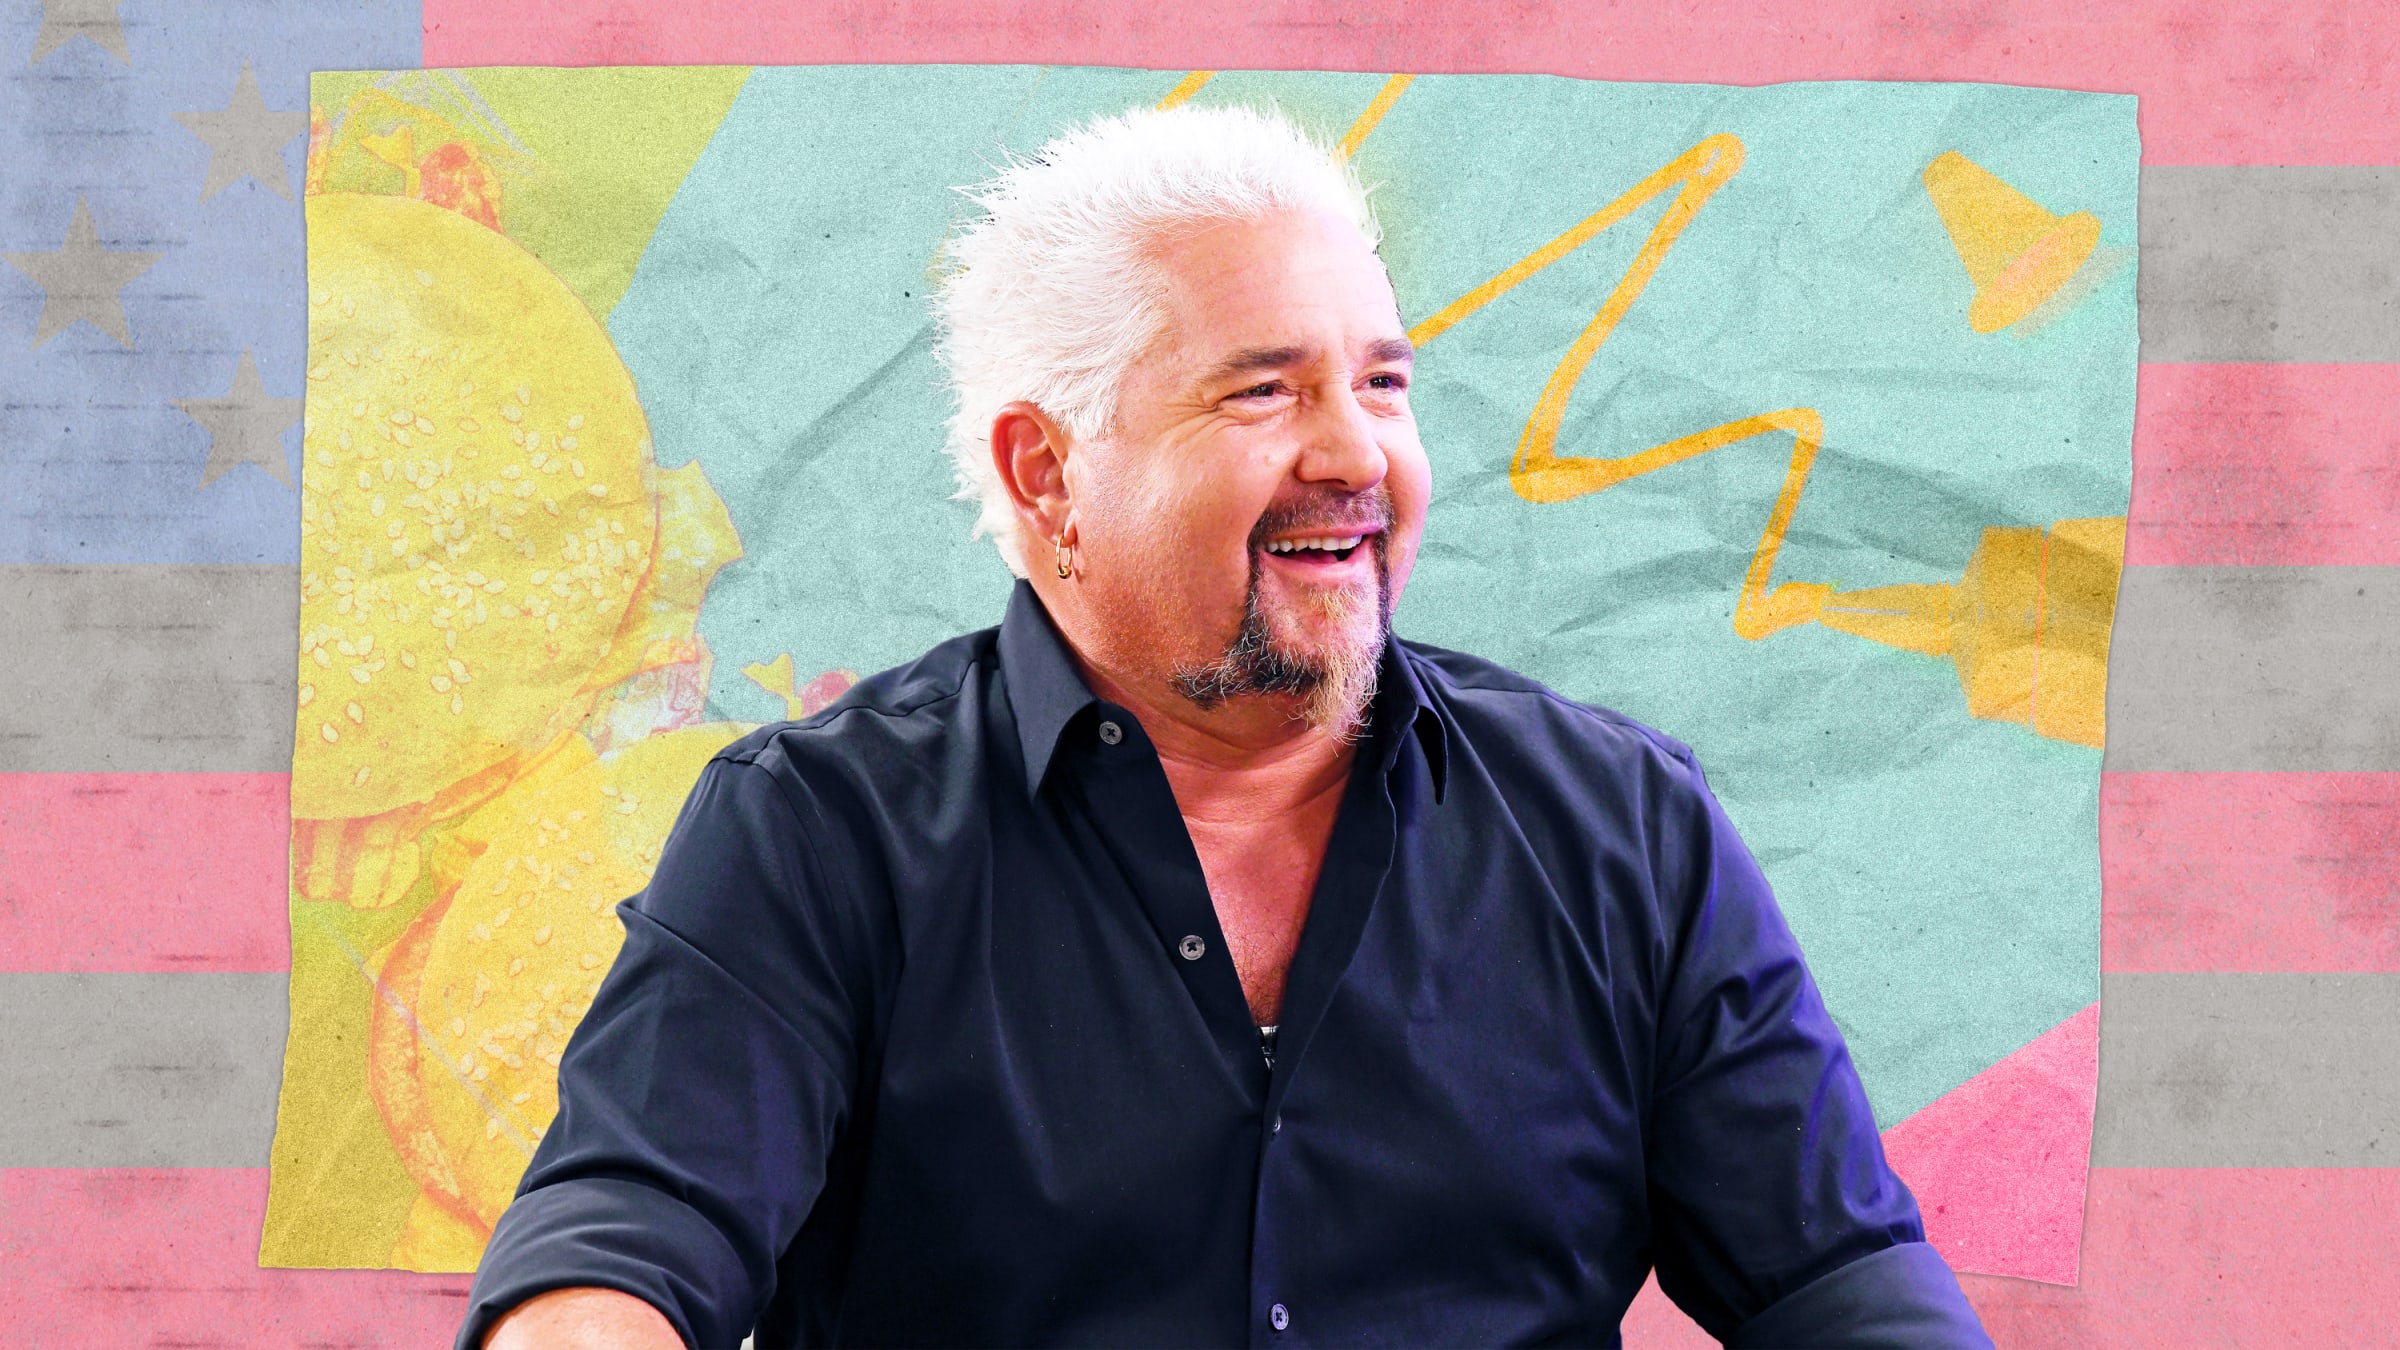 All the Guy Fieri 'Triple D' restaurants within driving distance of Tampa  Bay, Tampa